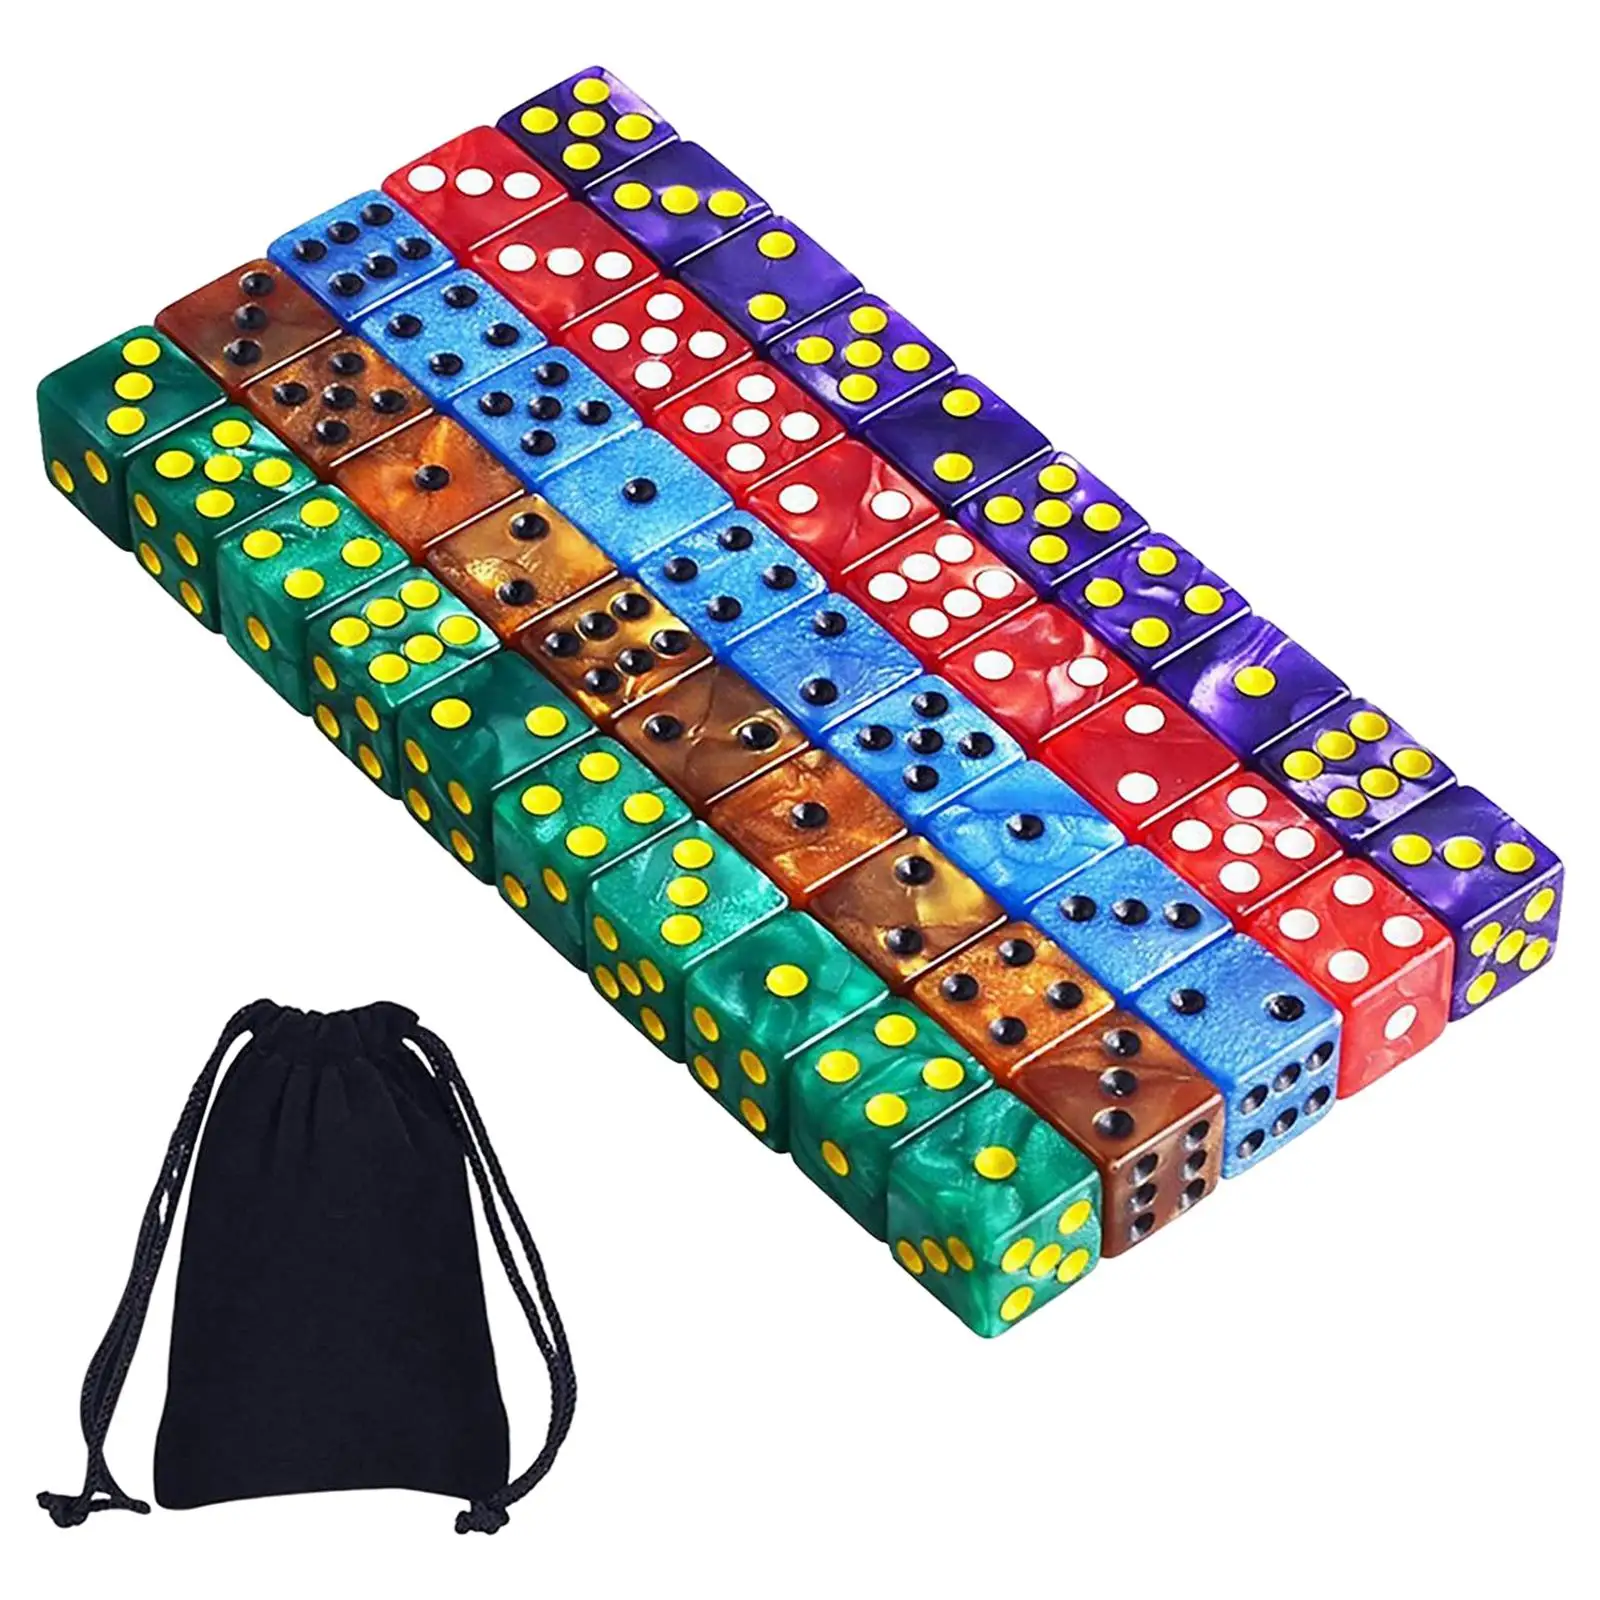 50x Polyhedral Dices Game Dices Party Favors Math Counting Teaching Aids 6 Sided Dices Set for Board Game